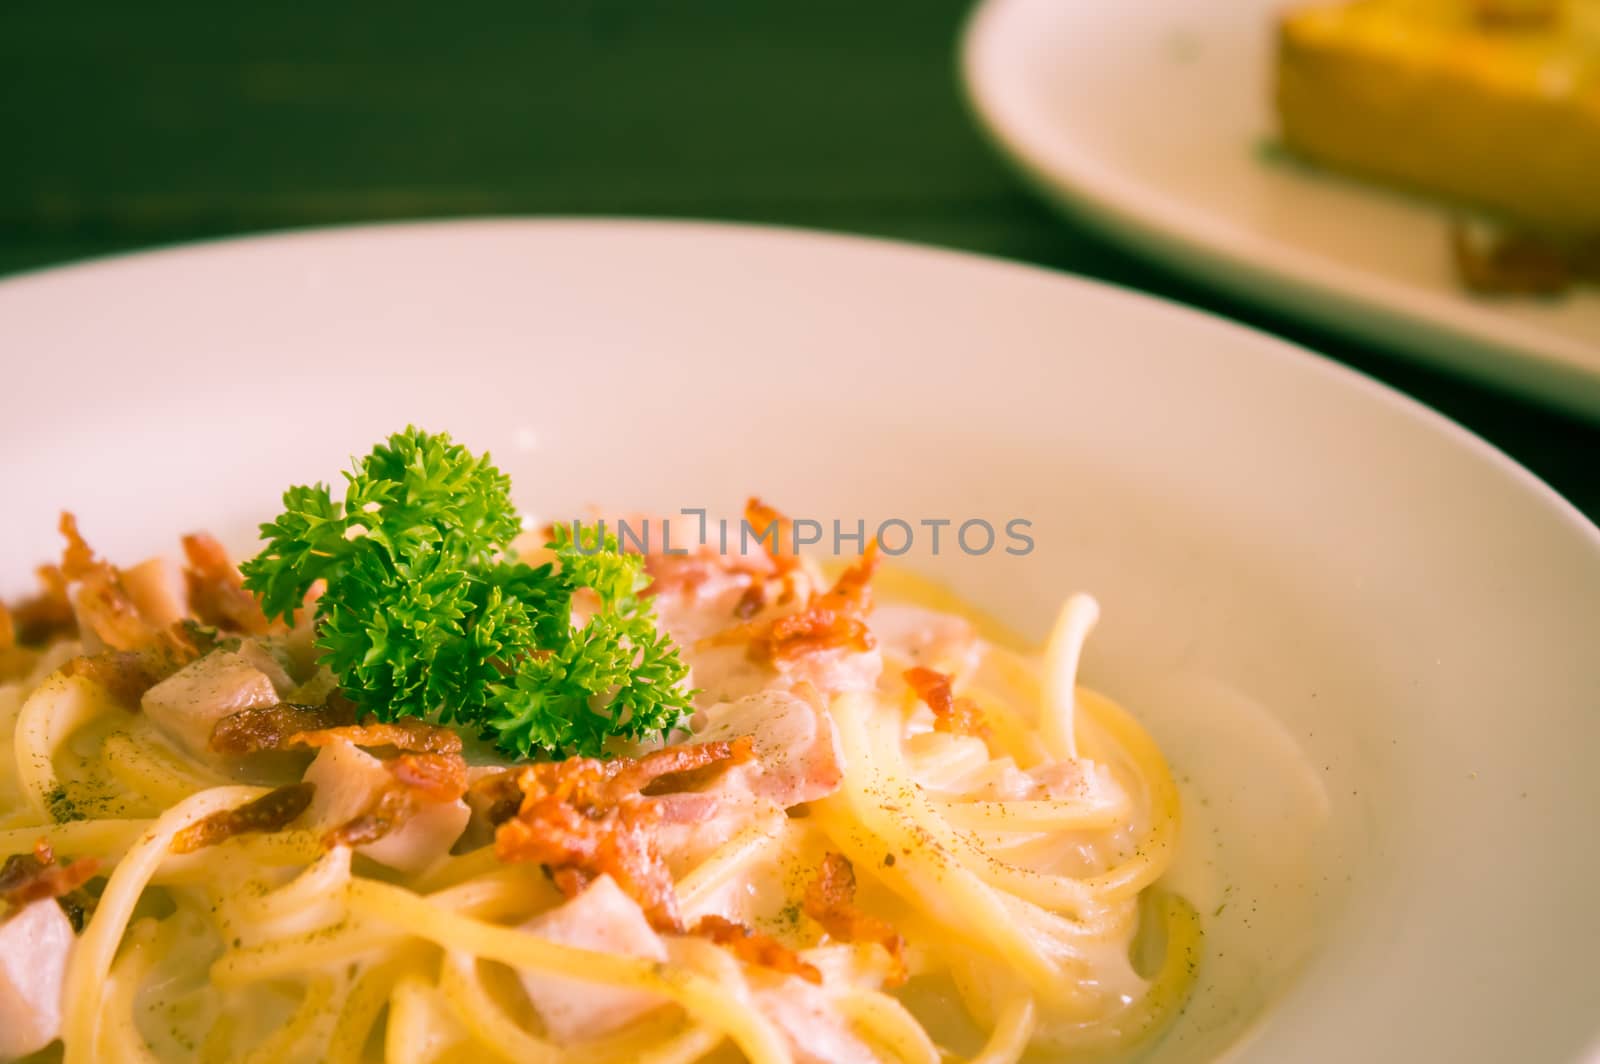 Spaghetti Carbonara with Bacon and Ham and Parsley and Mayonnaise Sauce. Spaghetti Carbonara with Bacon and Ham in mayonnaise cream sauce for food and drink category. 
Spaghetti Carbonara with Bacon breakfast